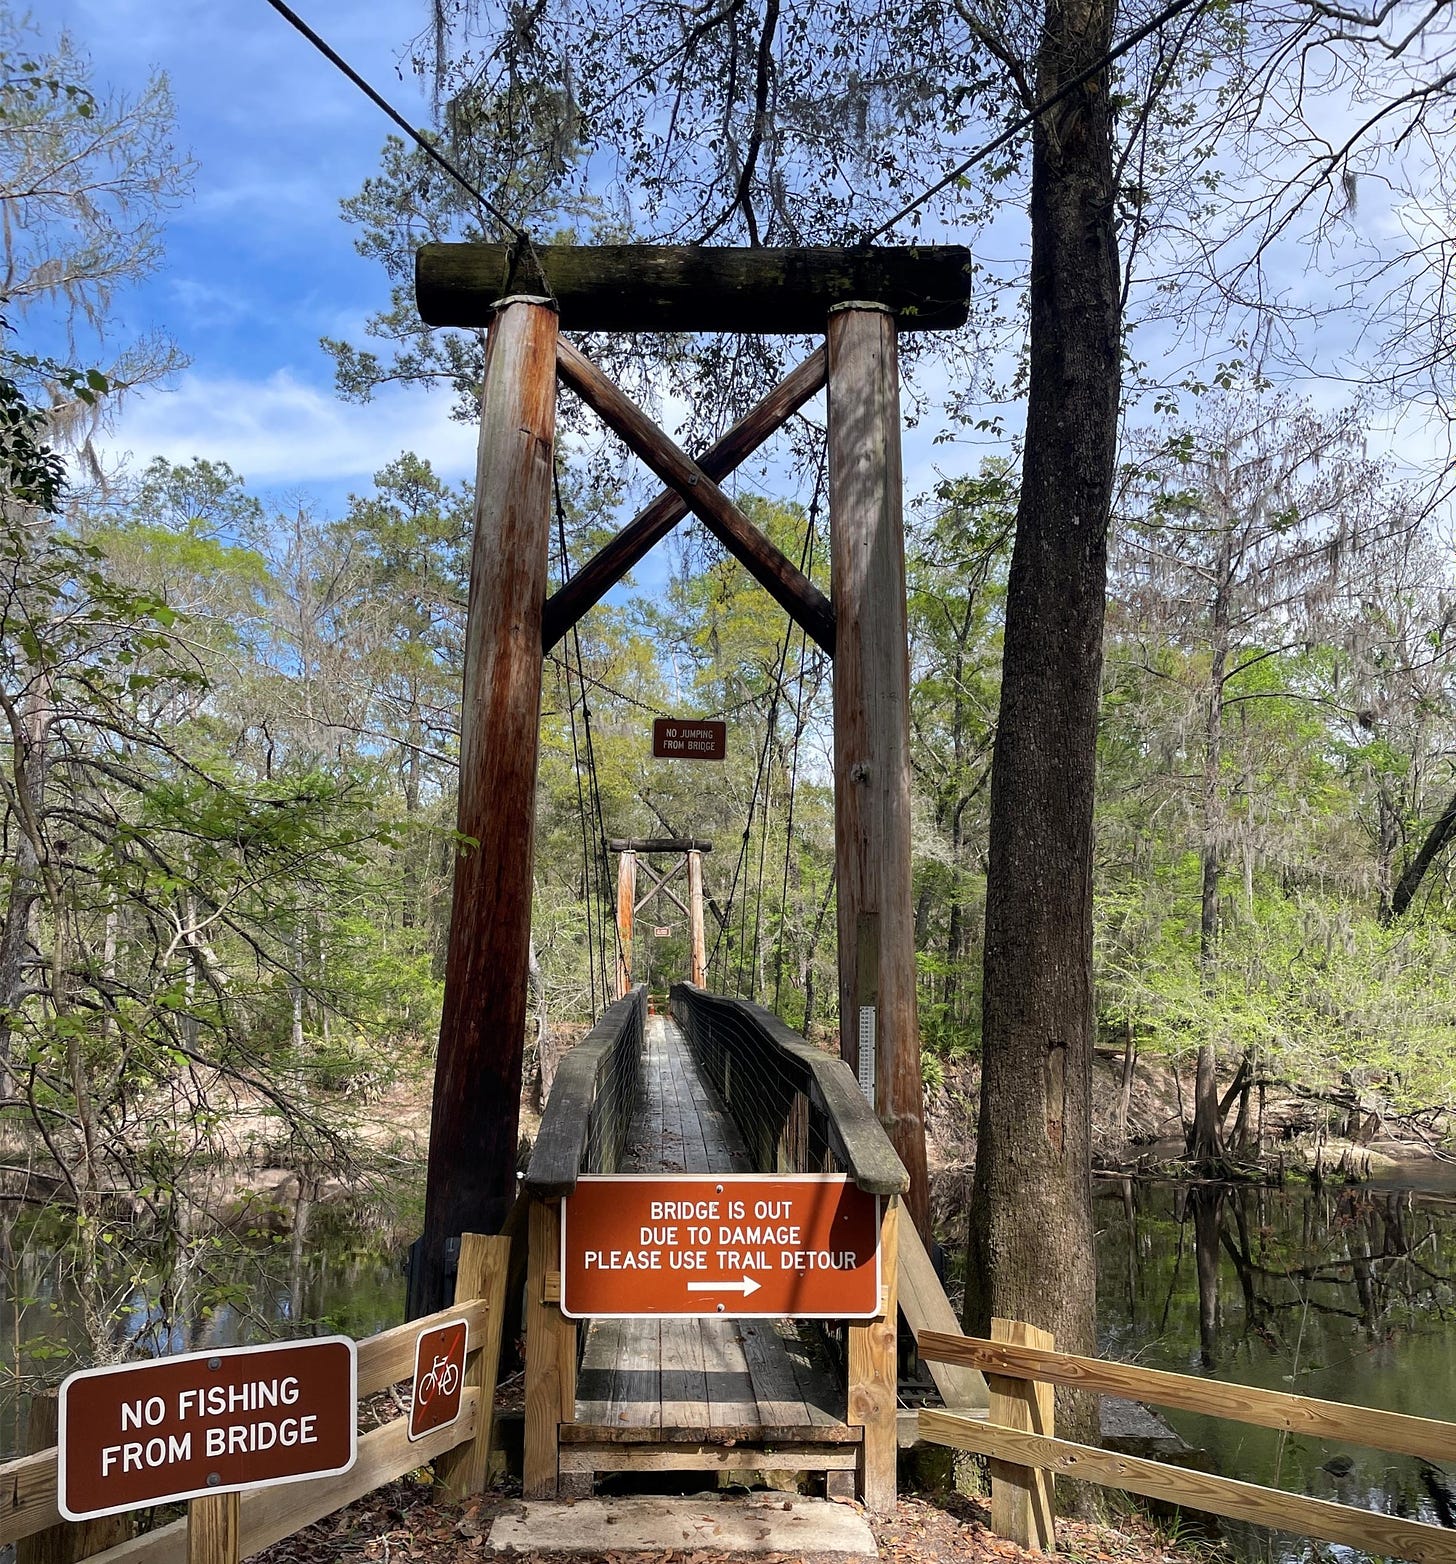 Suspension bridge across a river. Signs on bridge indicate it is out of order. 